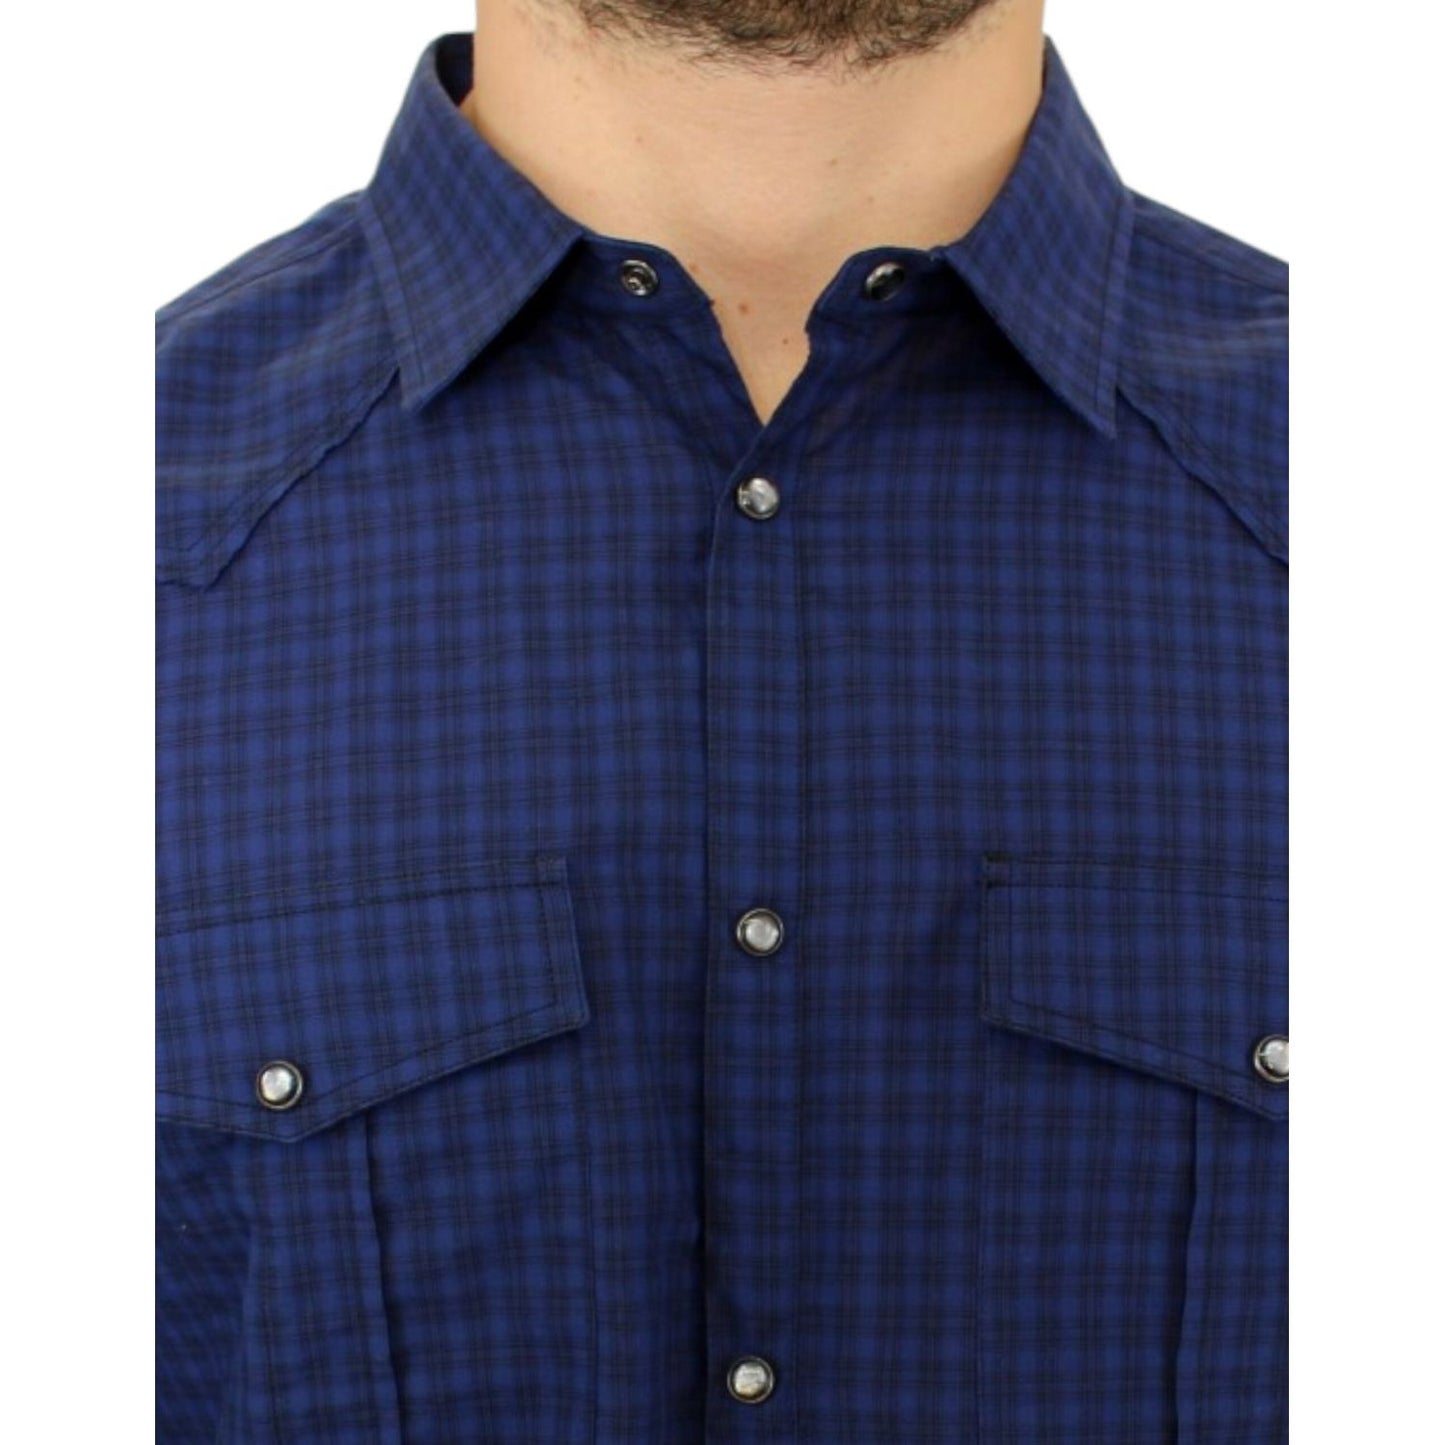 Costume National Chic Blue Checkered Casual Cotton Shirt blue-checkered-cotton-shirt